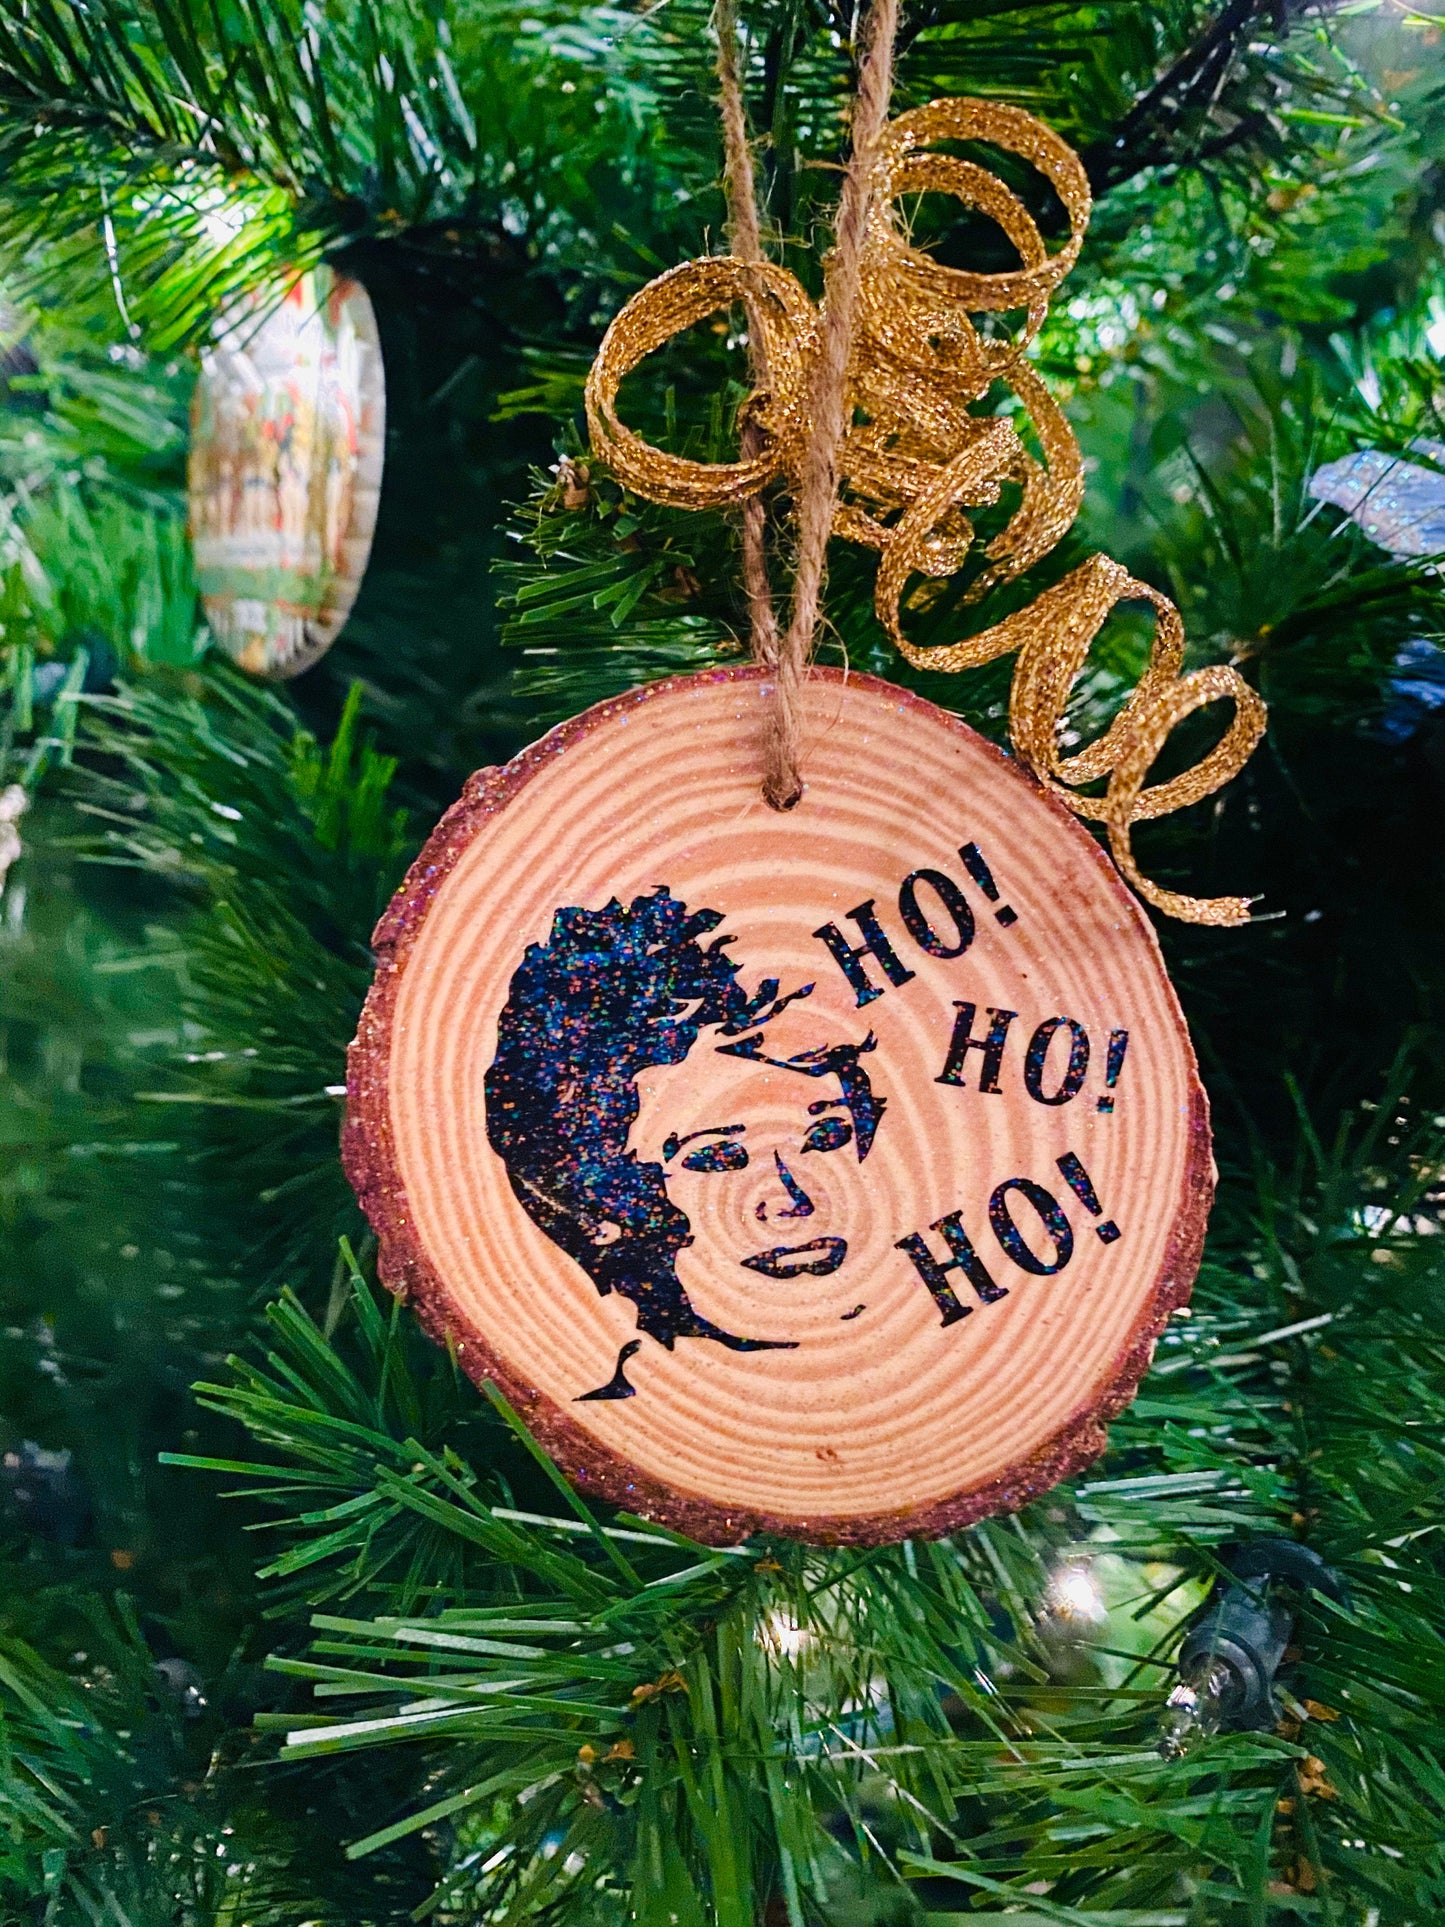 Golden girls wood Christmas tree ornaments, holiday gift, 90's tv show, shady pines, thank you for being a friend! Blanche!